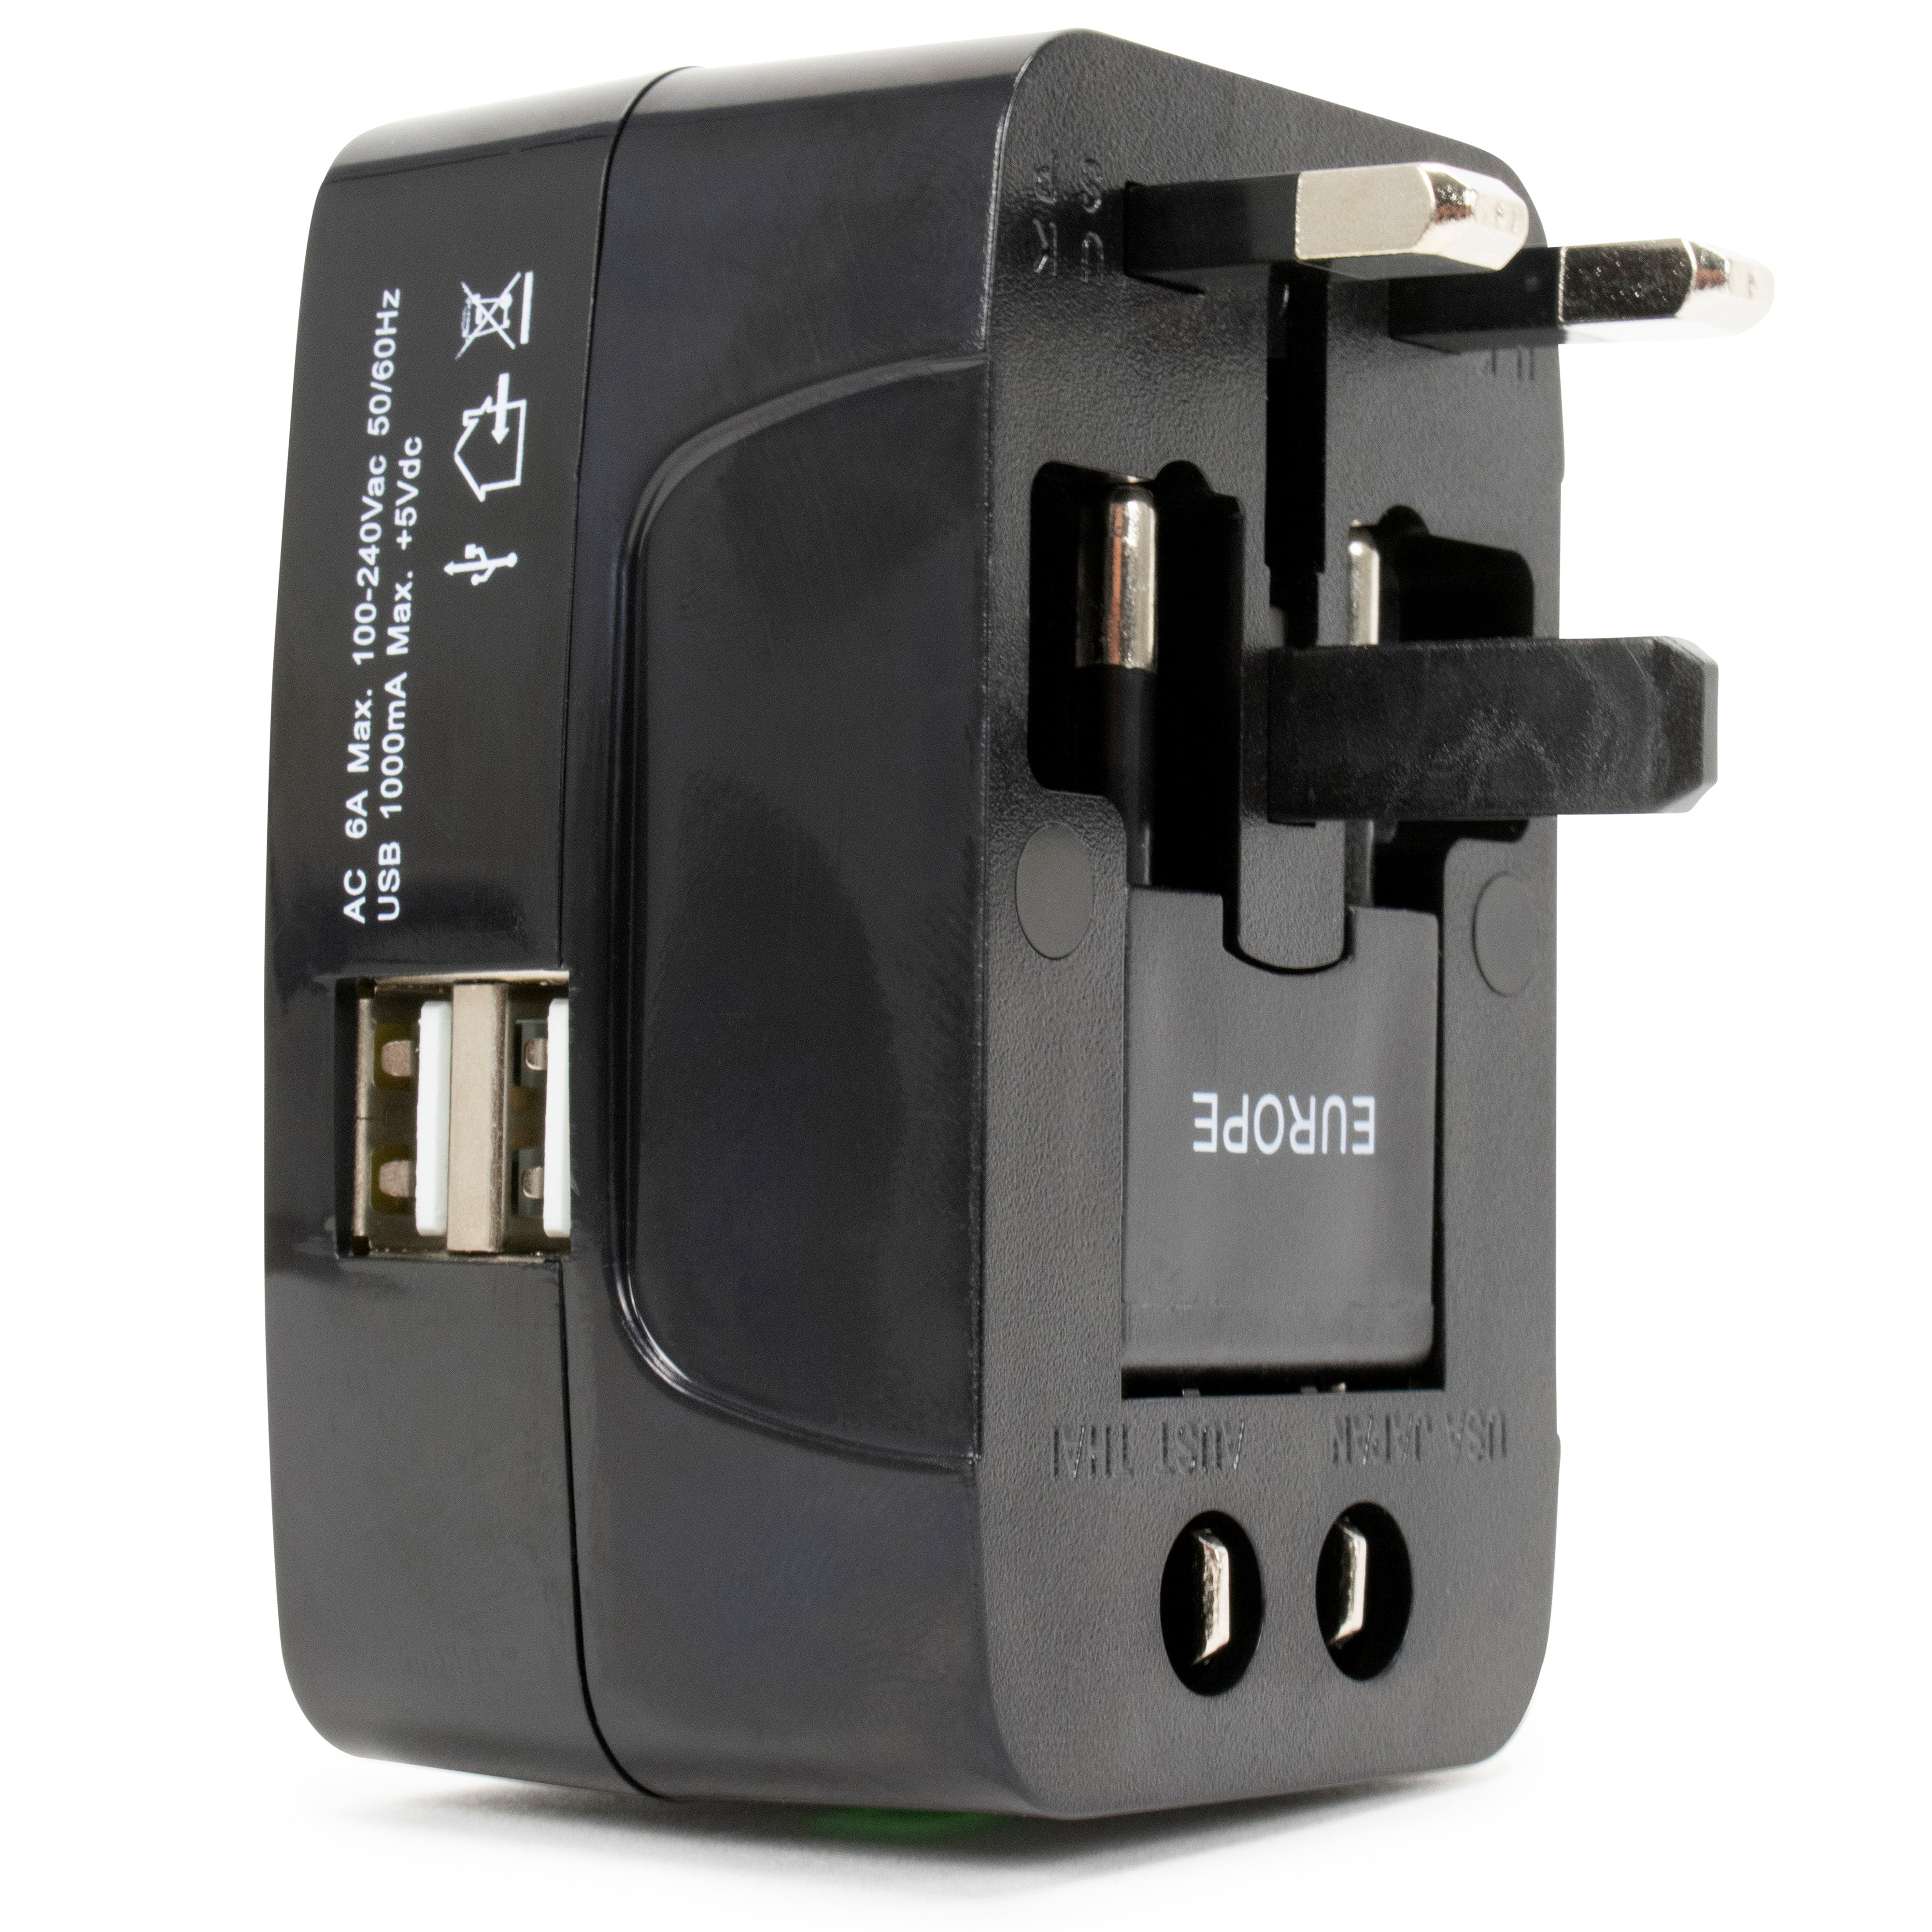 International Travel Adapter with USB Ports